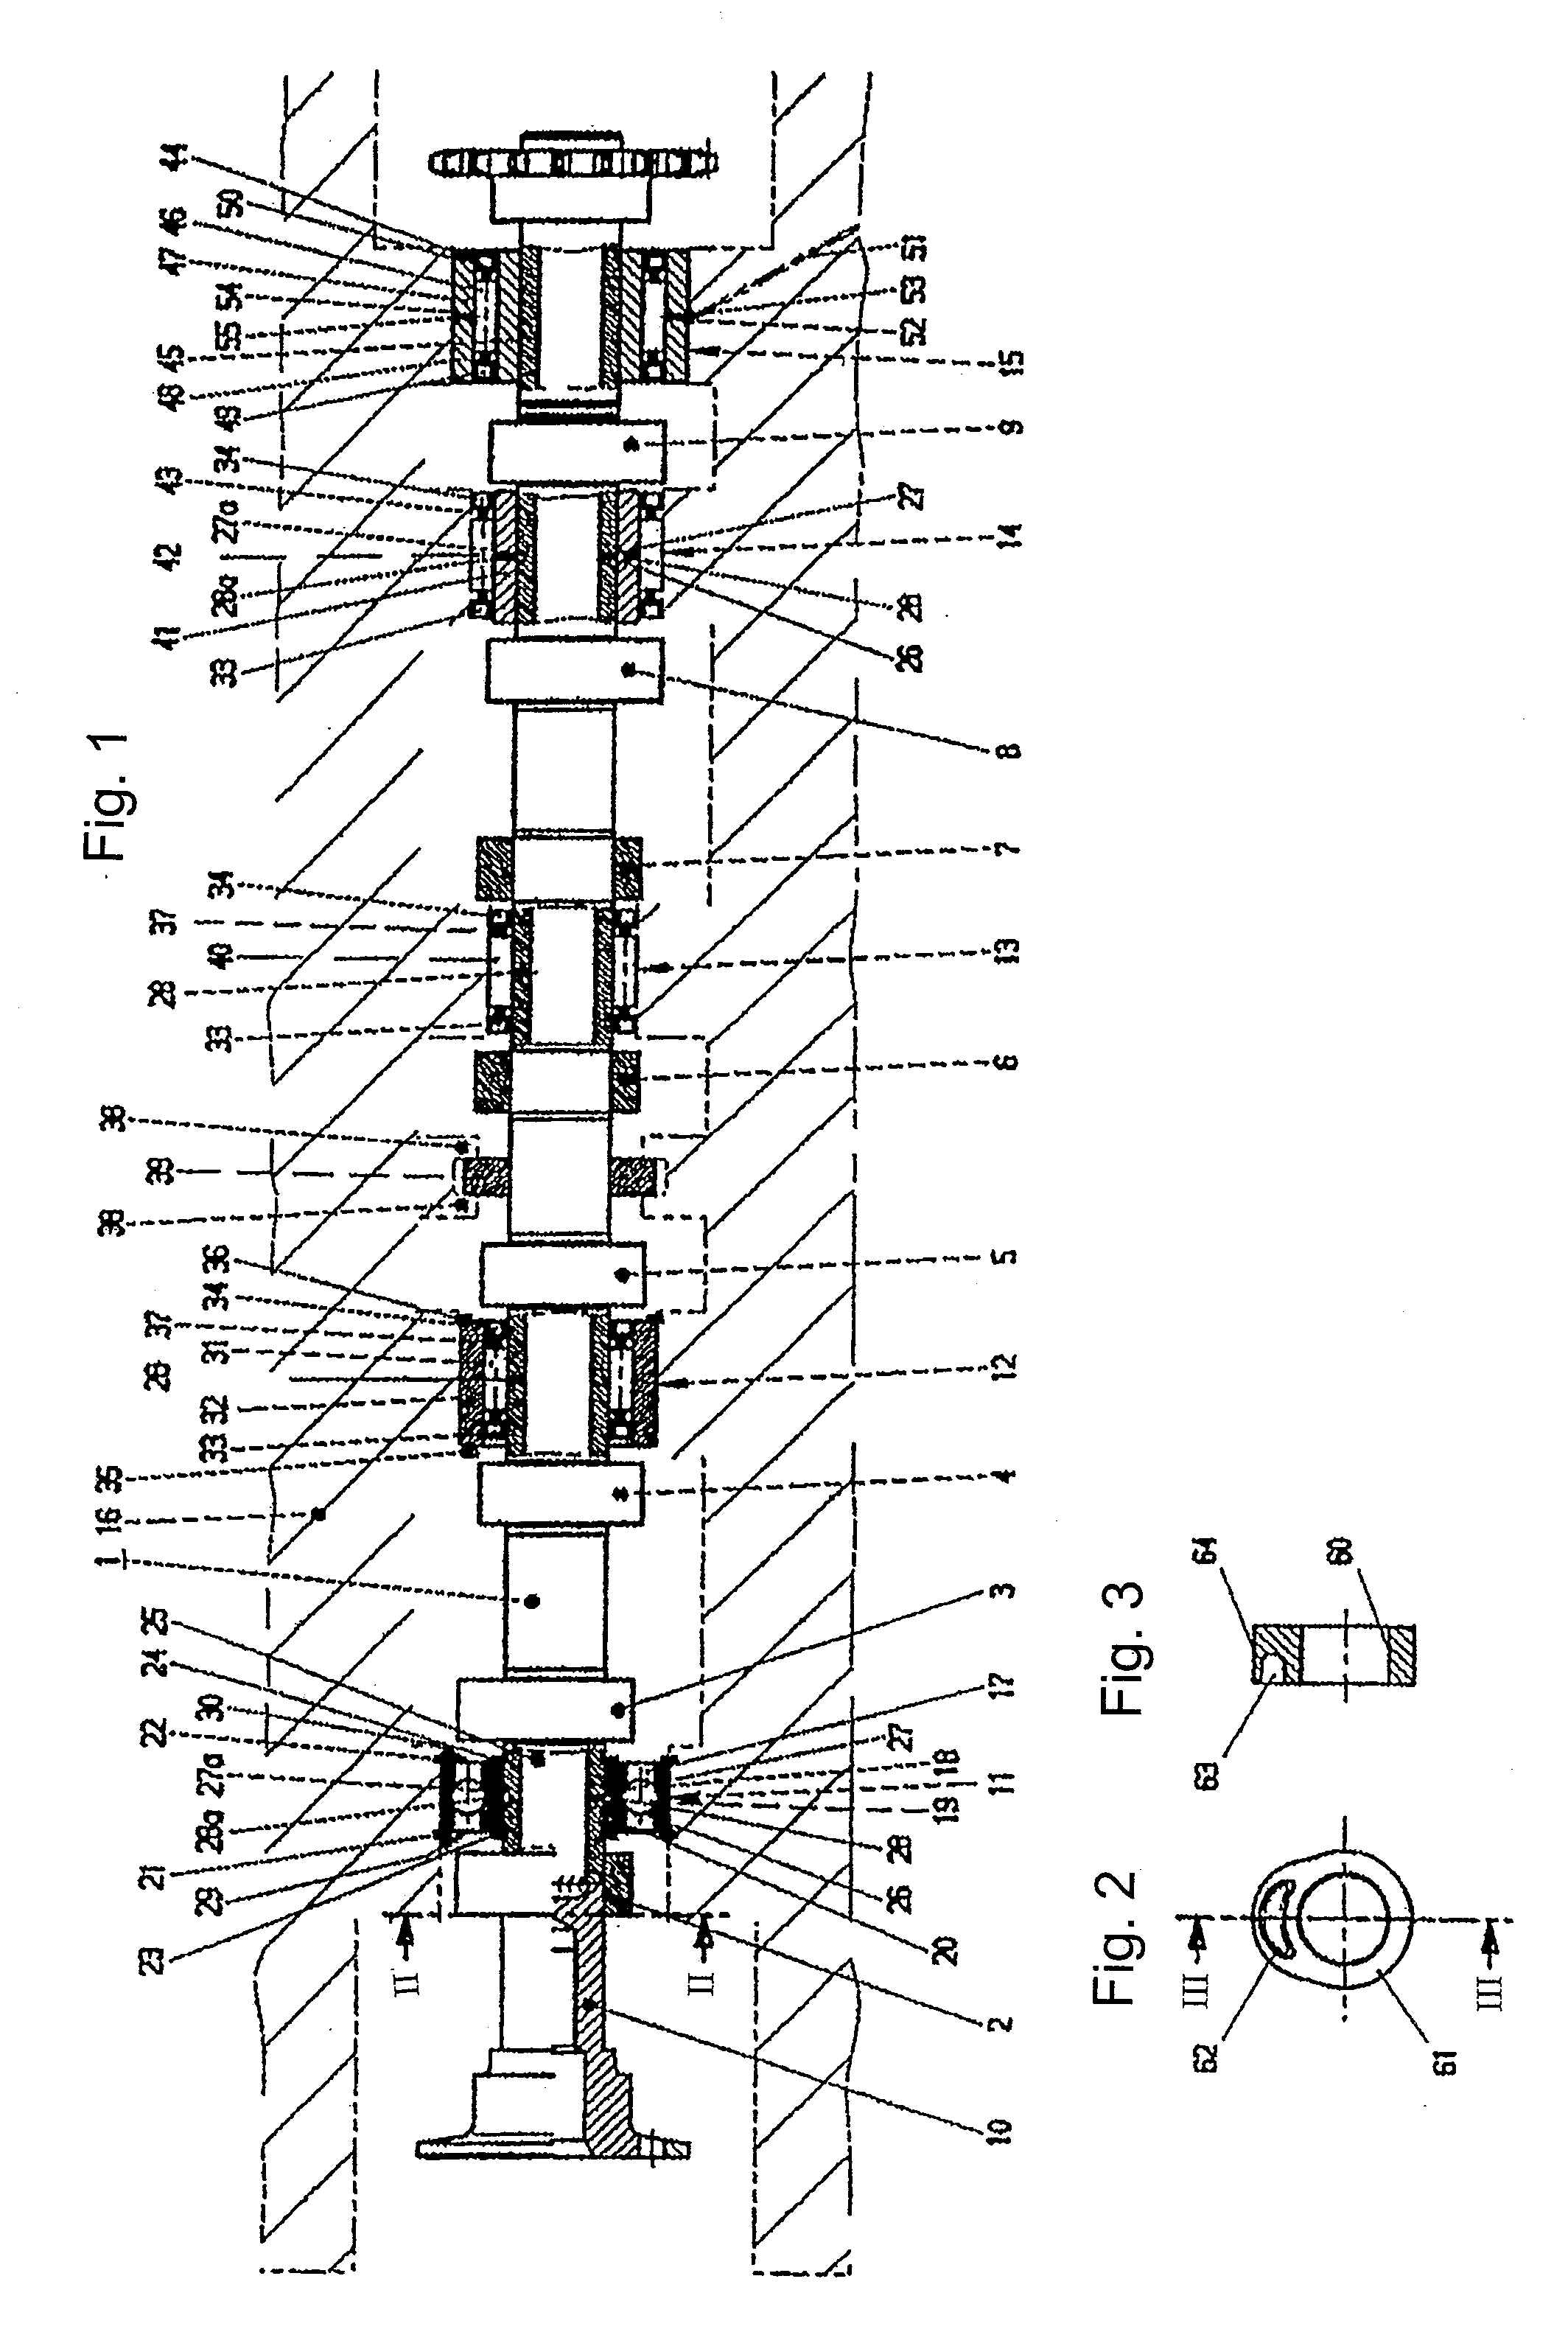 Shaft with Functional Bodies Such as Camshafts for Internal Combustion Engines, Method of Producing Them and Engines Equipped Therewith